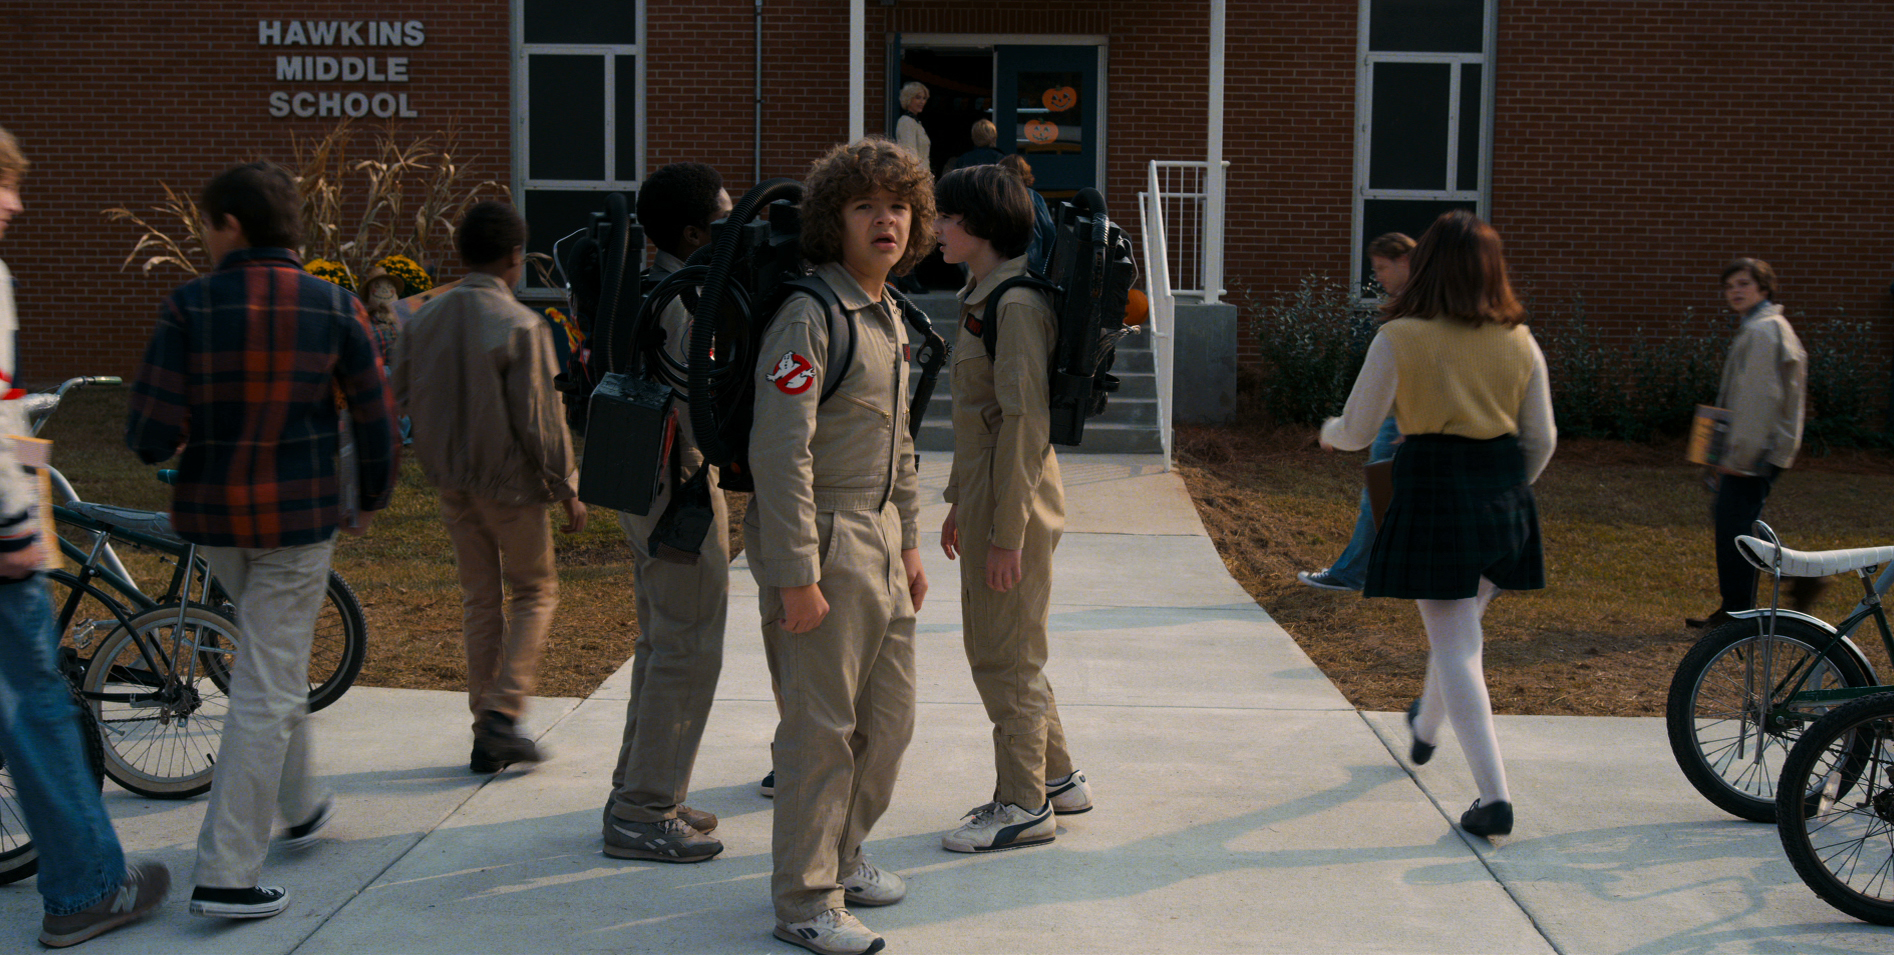 Stranger Things season 2: a key title this year for Netflix